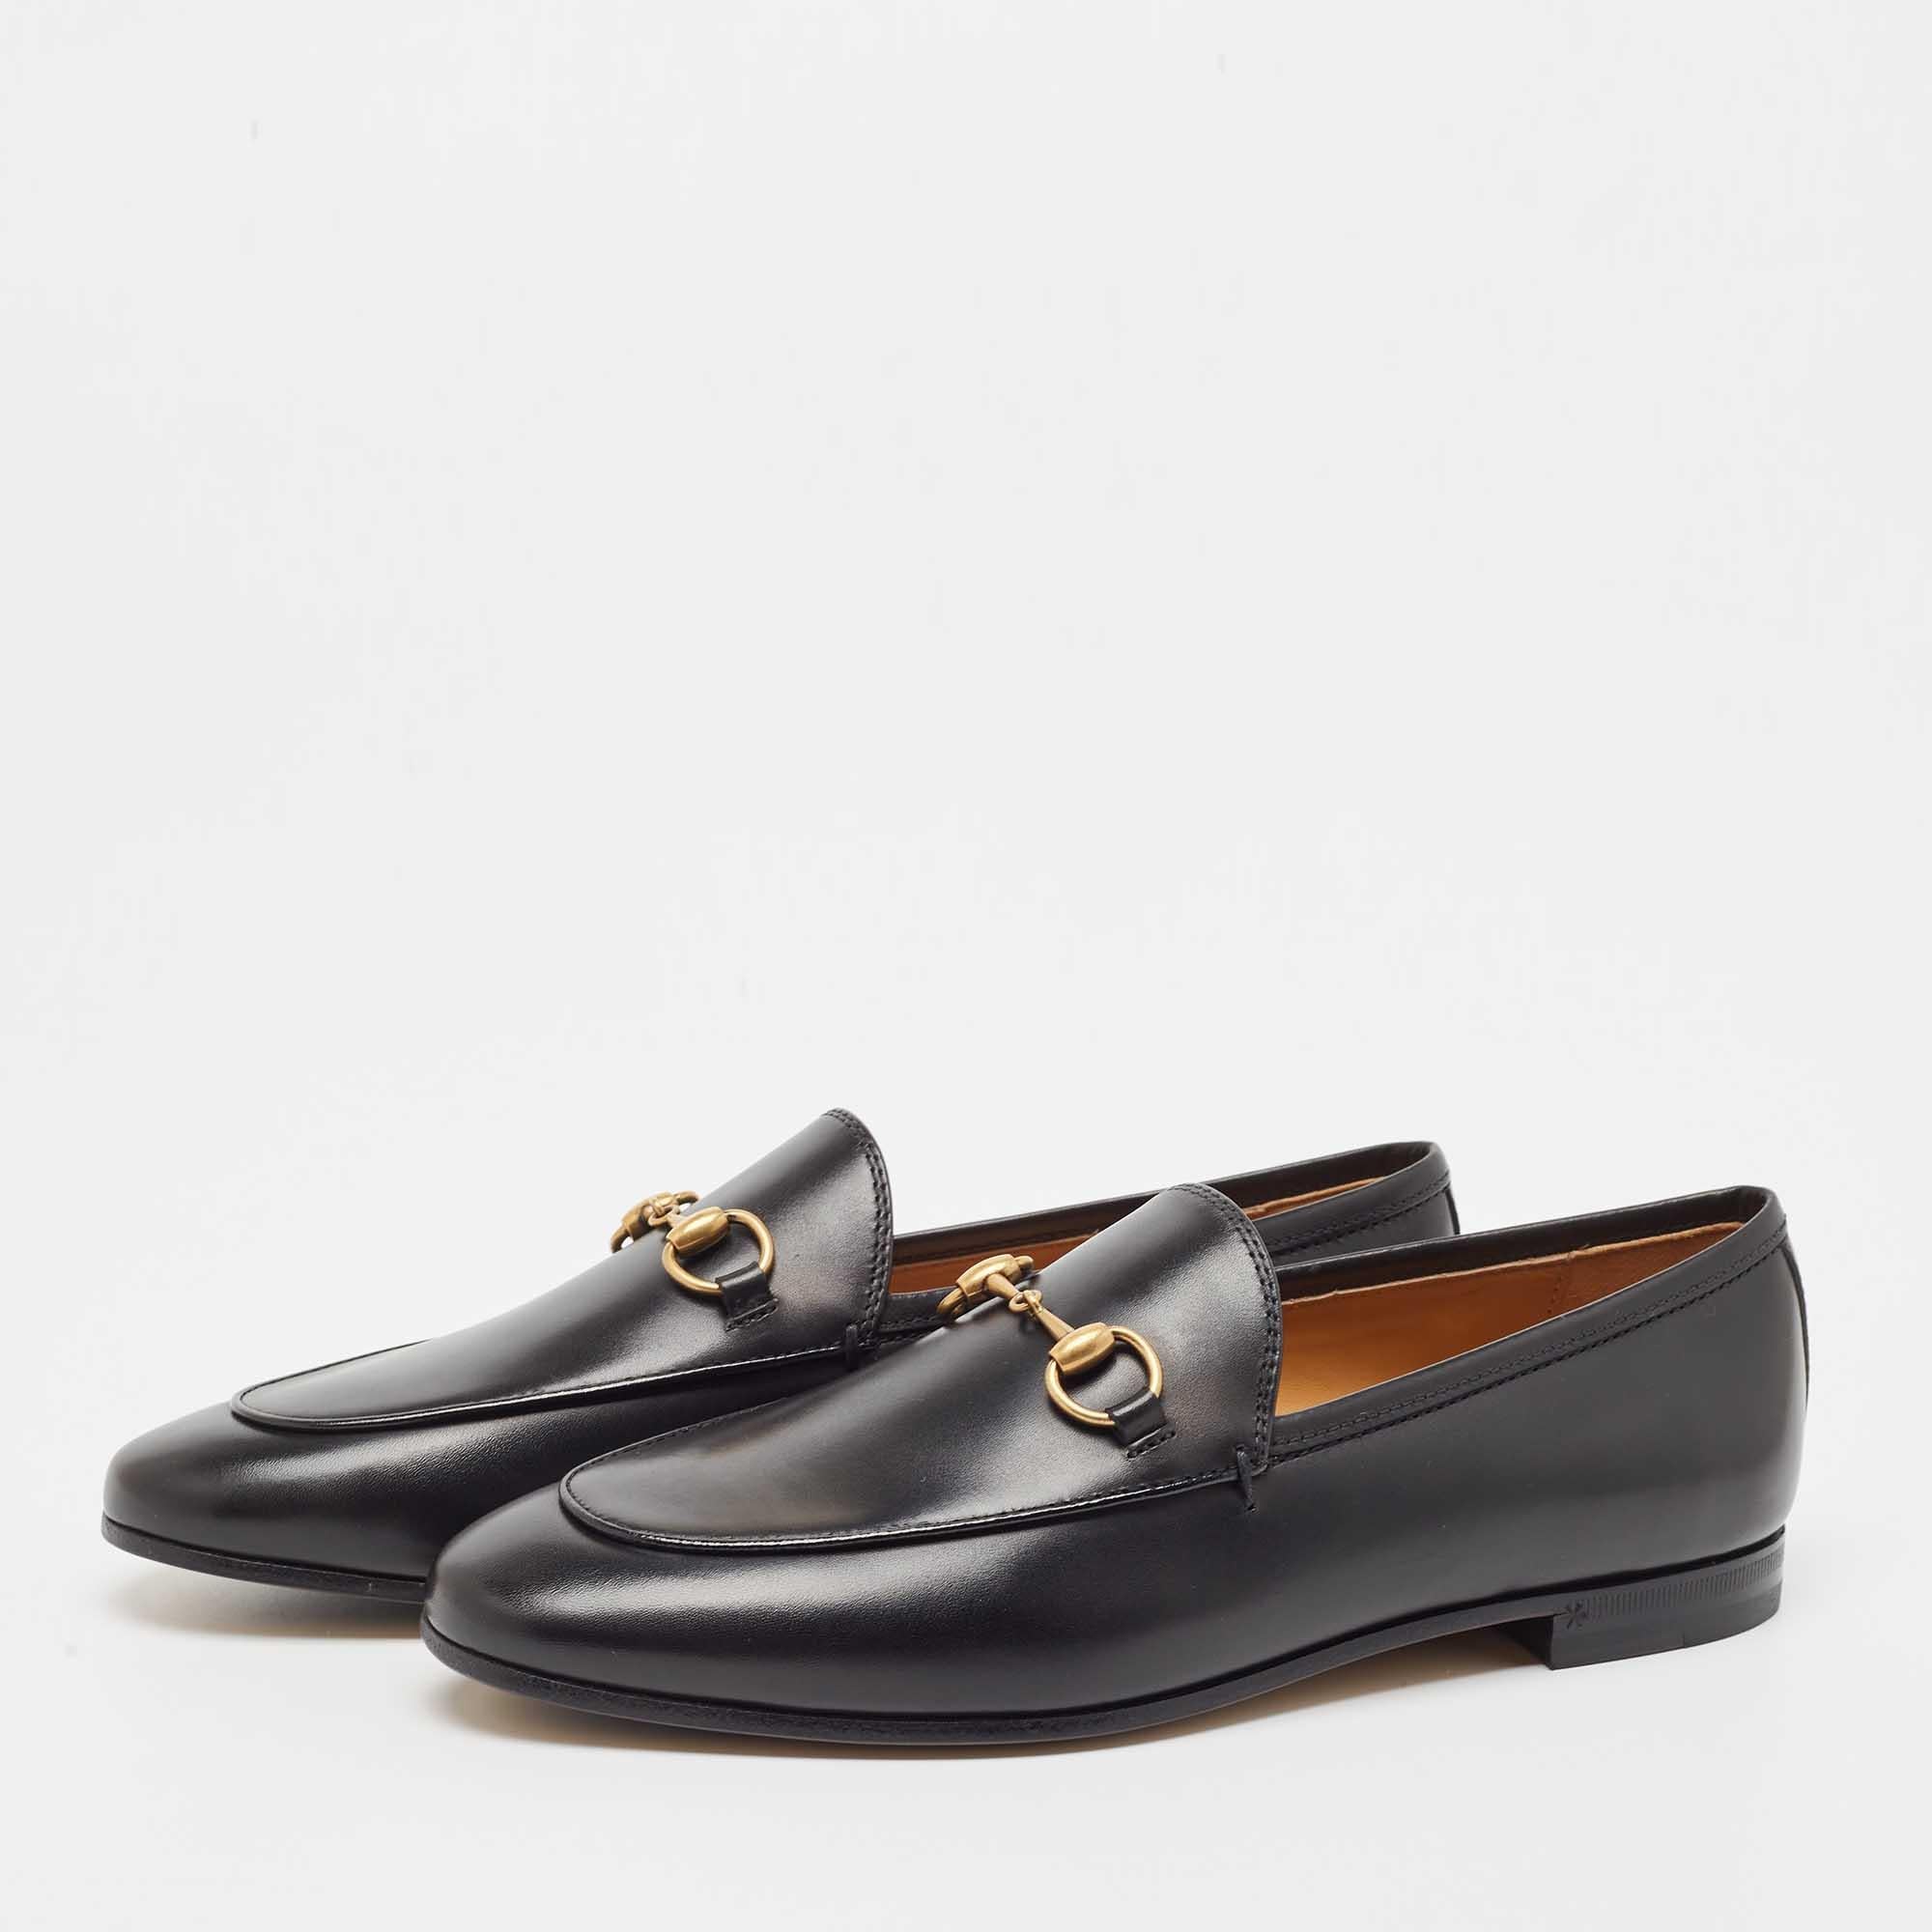 Practical, fashionable, and durable—these Gucci Jordaan loafers are carefully built to be fine companions to your everyday style. They come made using the best materials to be a prized buy.

Includes: Original Dustbag, Original Box